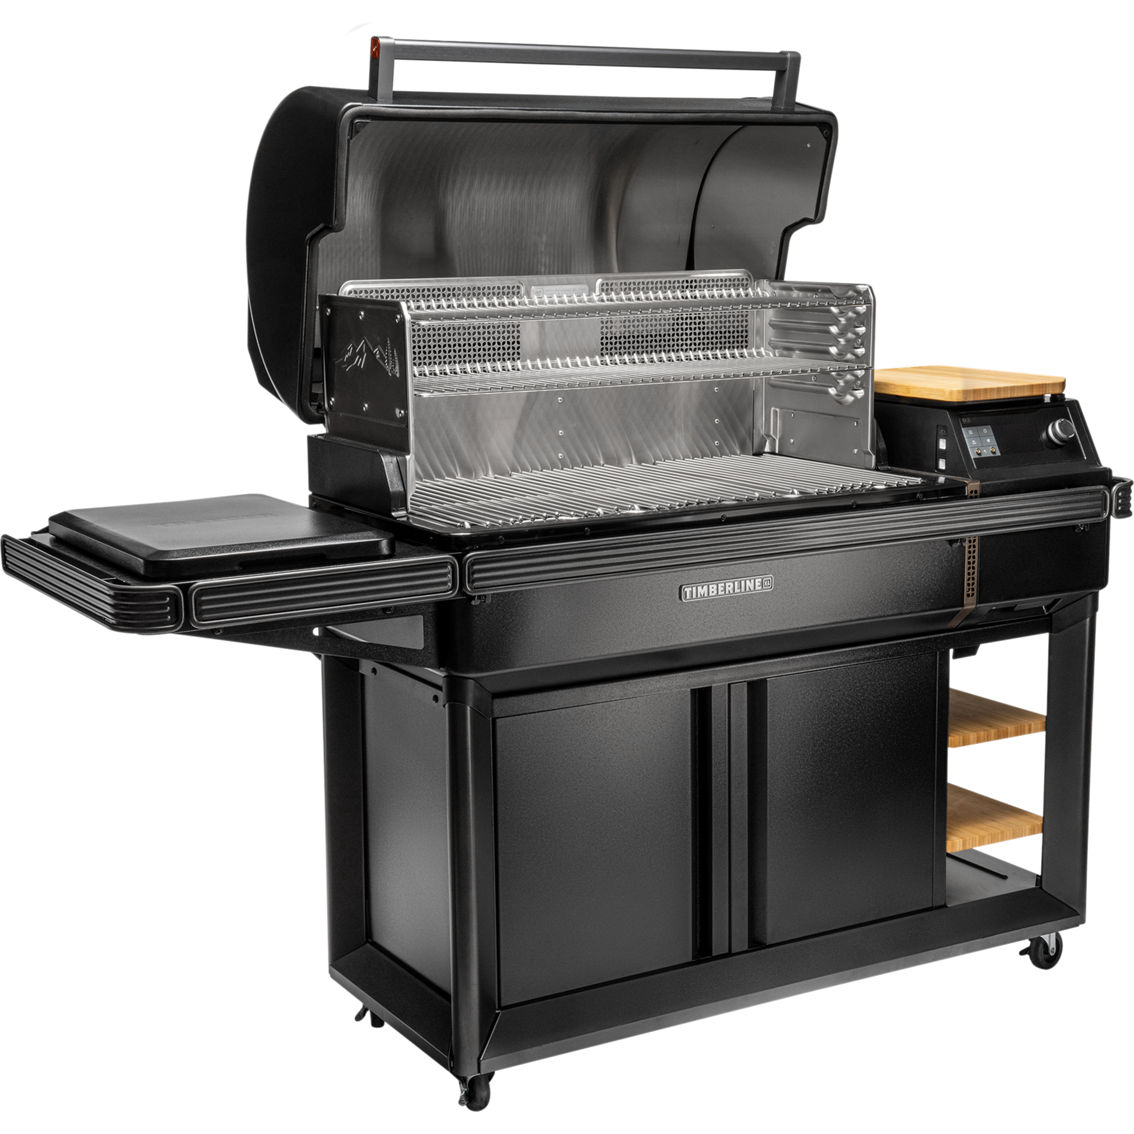 Traeger New Timberline Wood Pellet Grill XL - Image 3 of 6